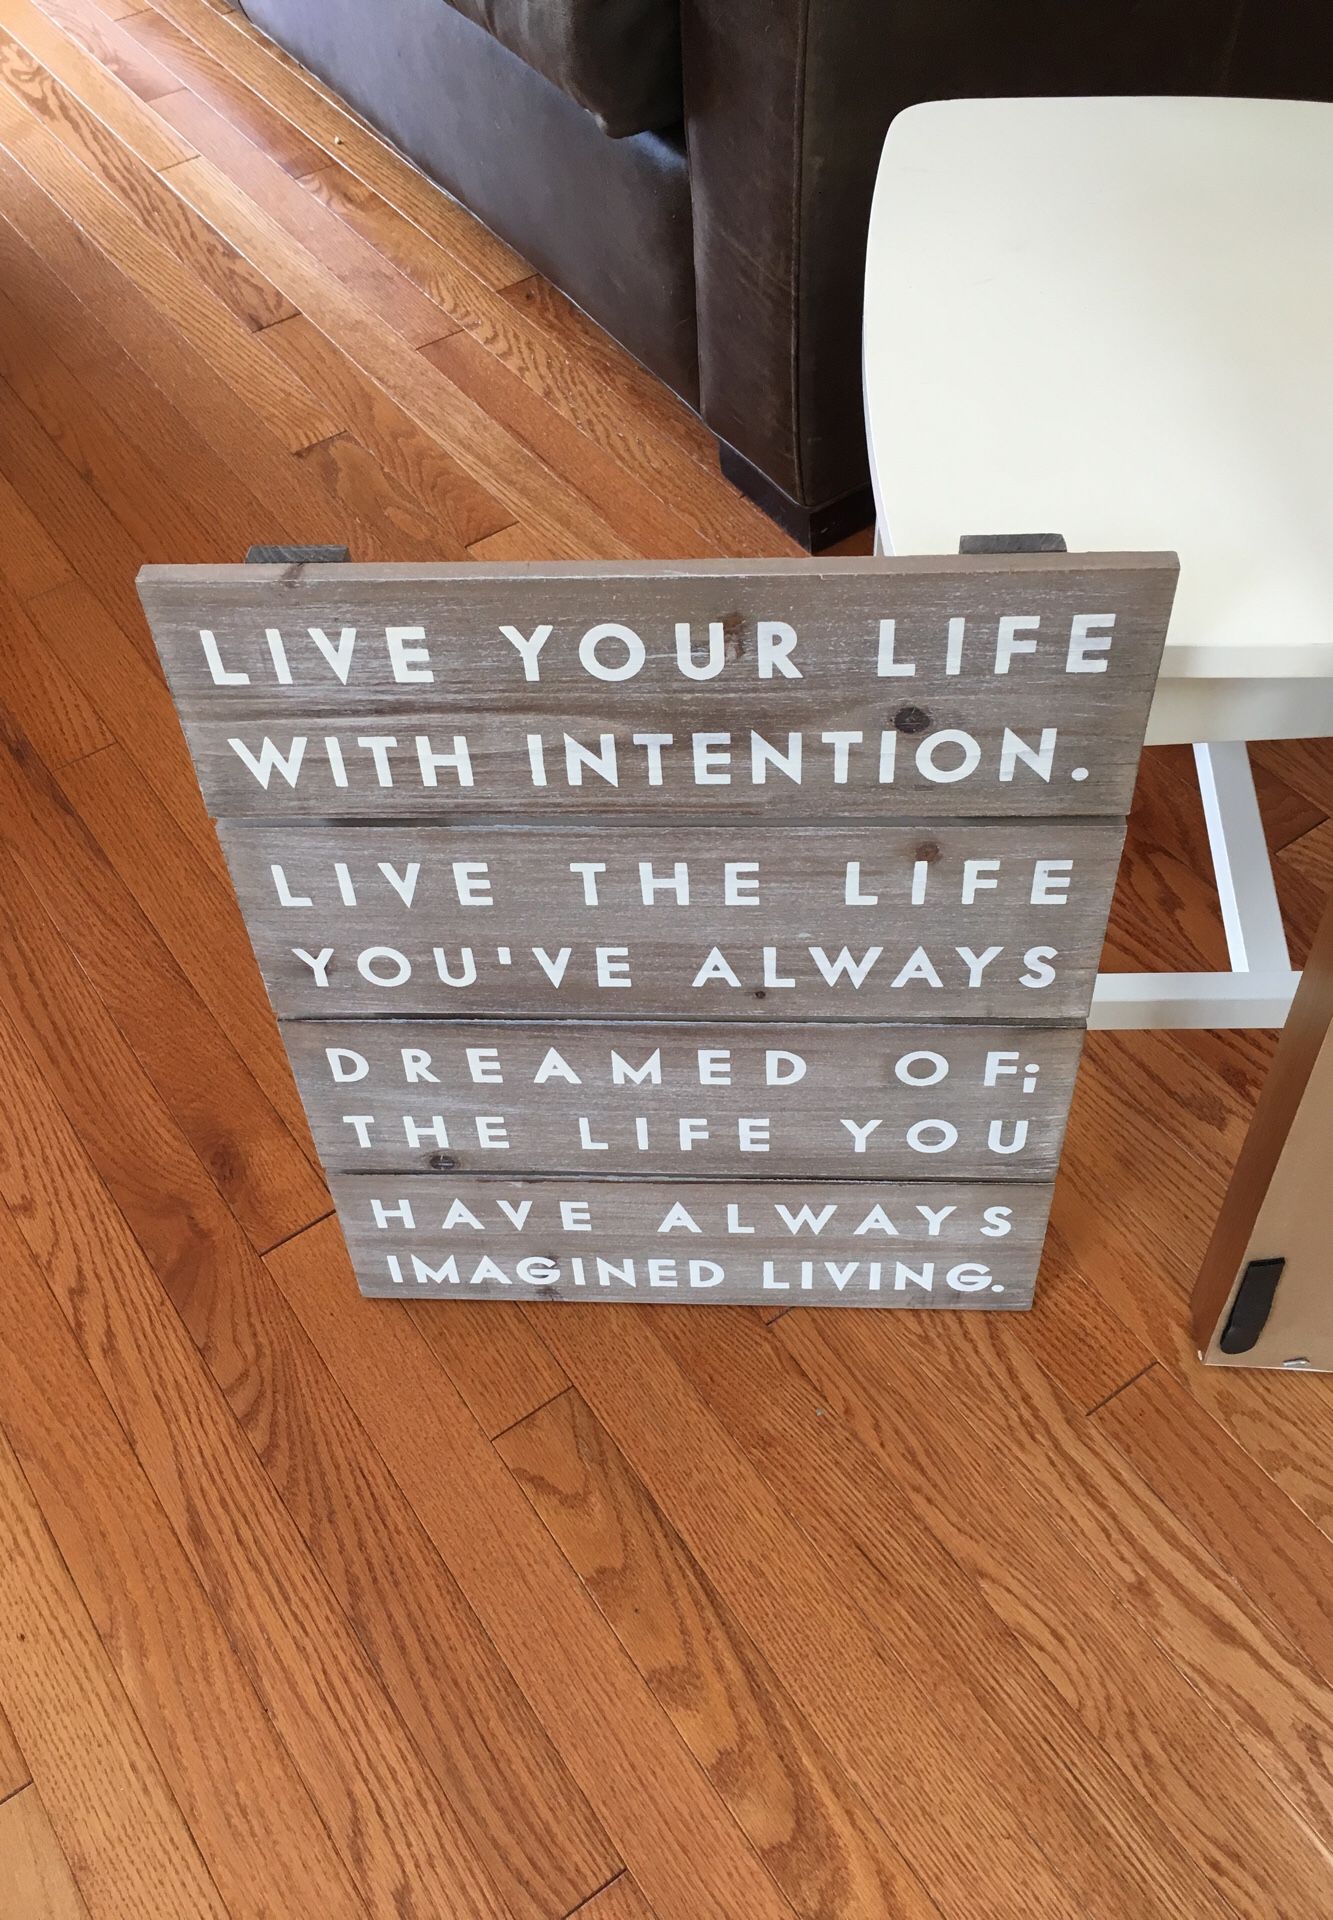 Decorative sign for the home. Approx 2x2 ft